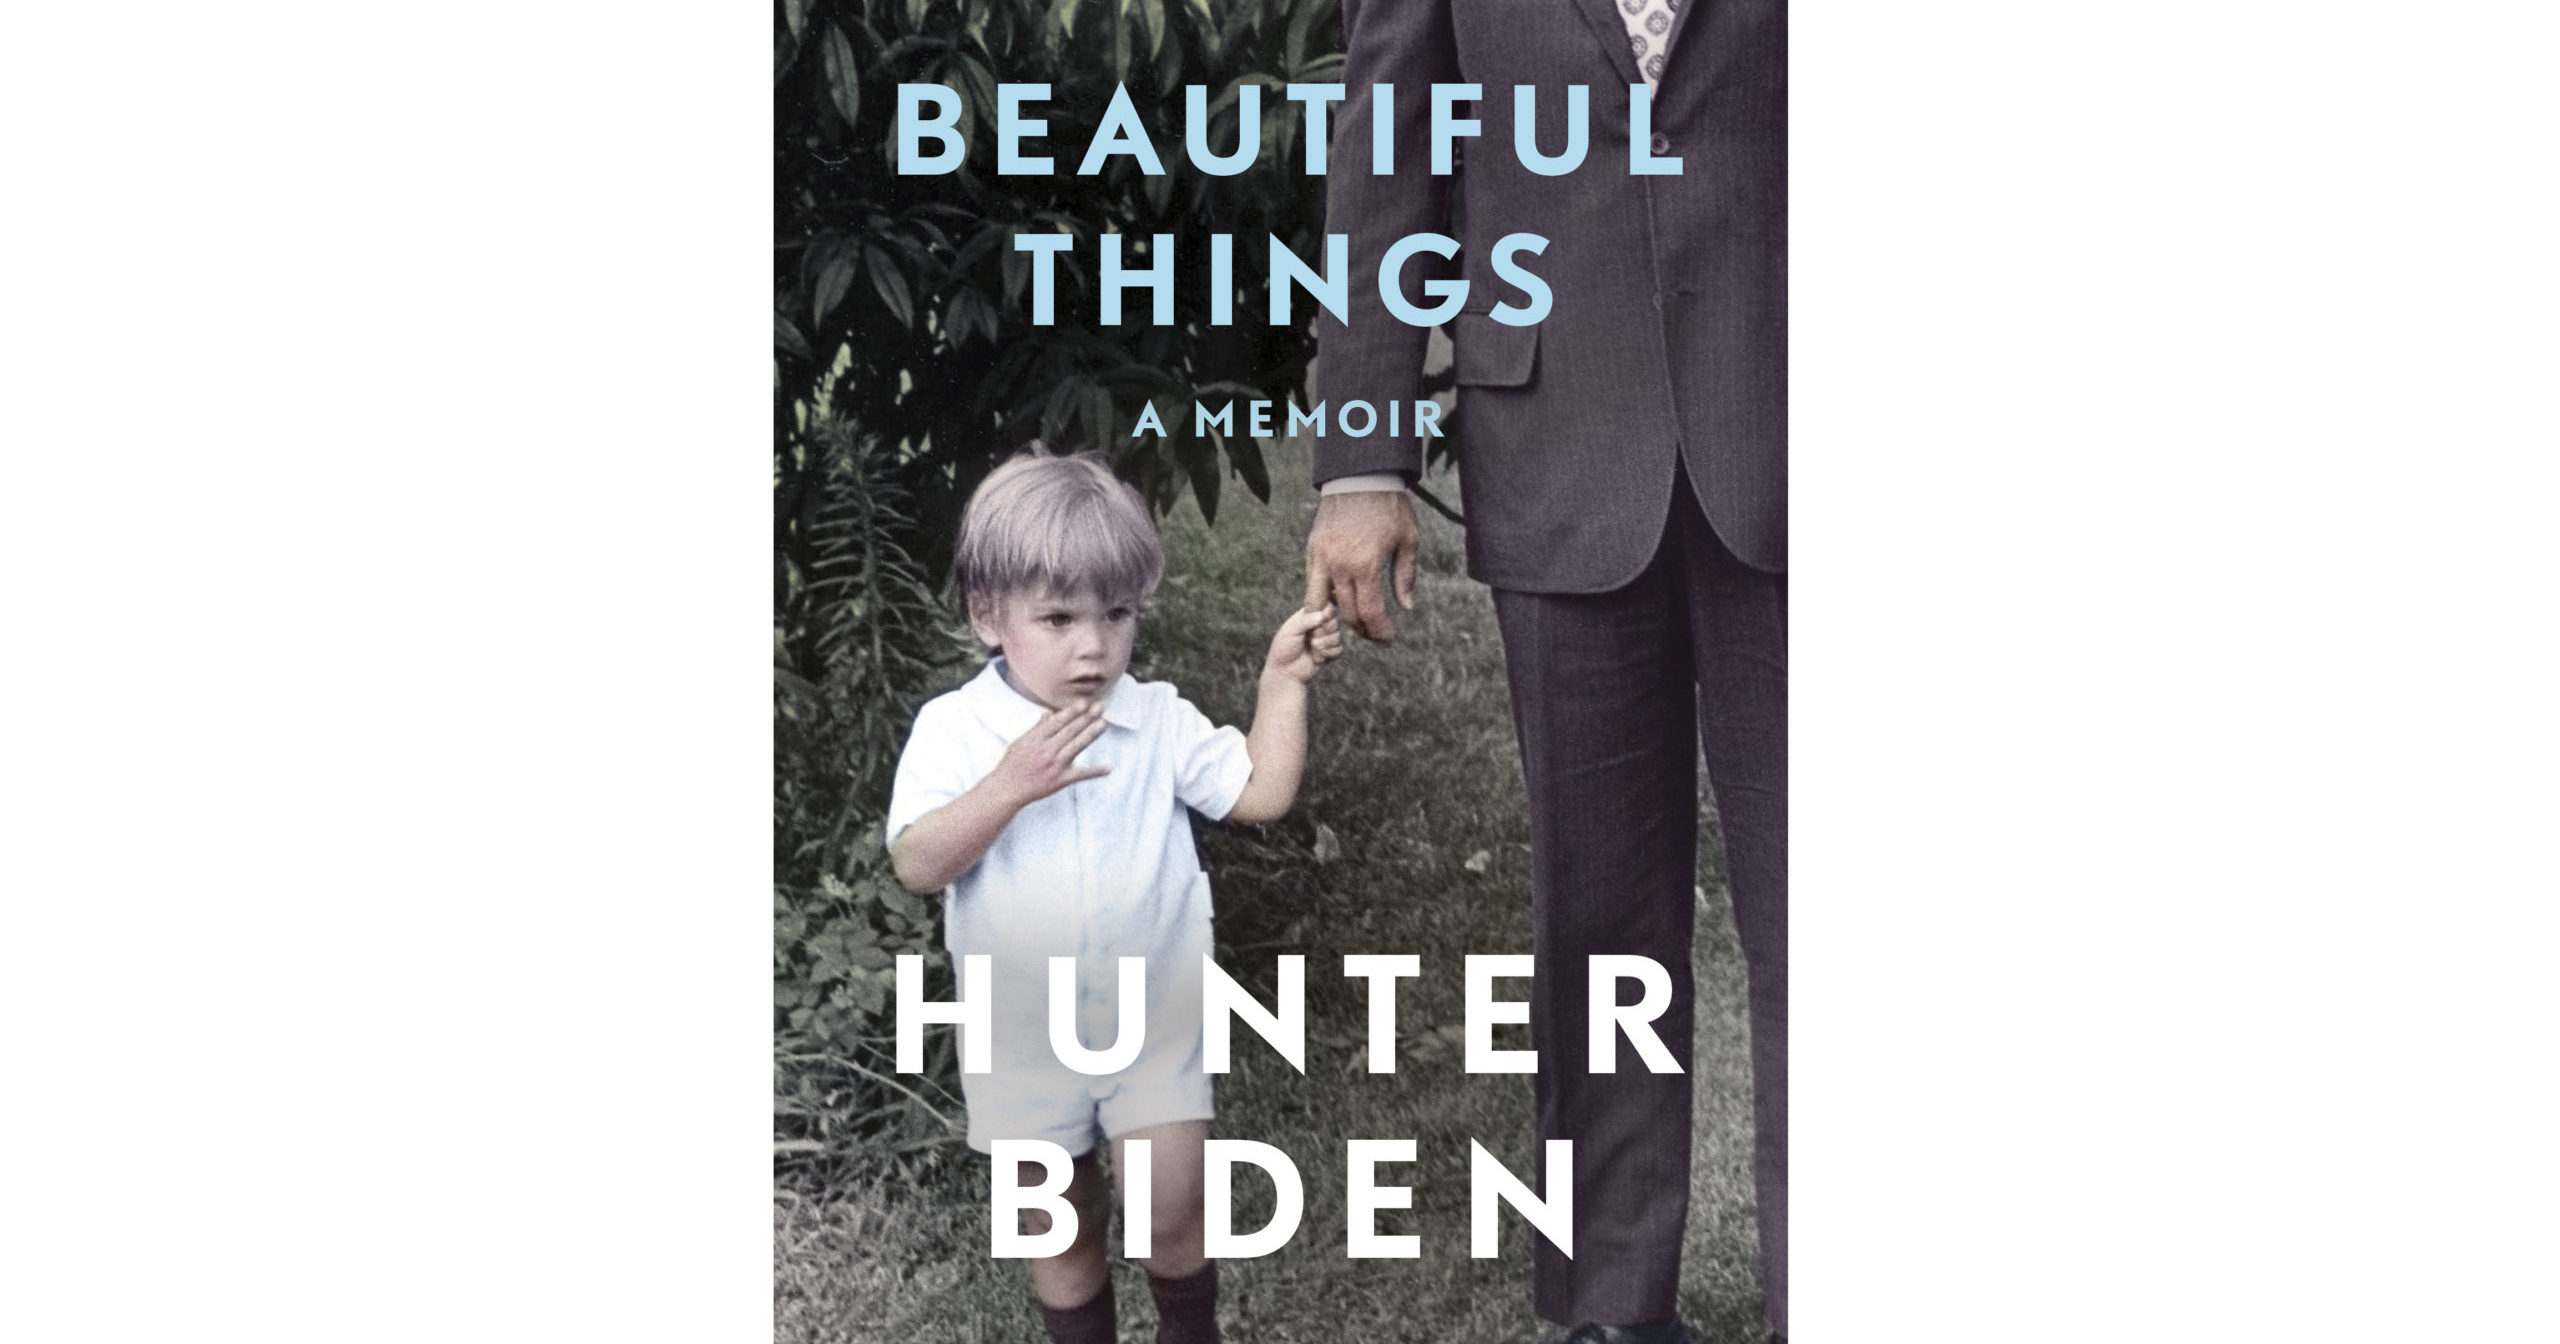 This cover image released by Gallery Books shows "Beautiful Things," a memoir by Hunter Biden.